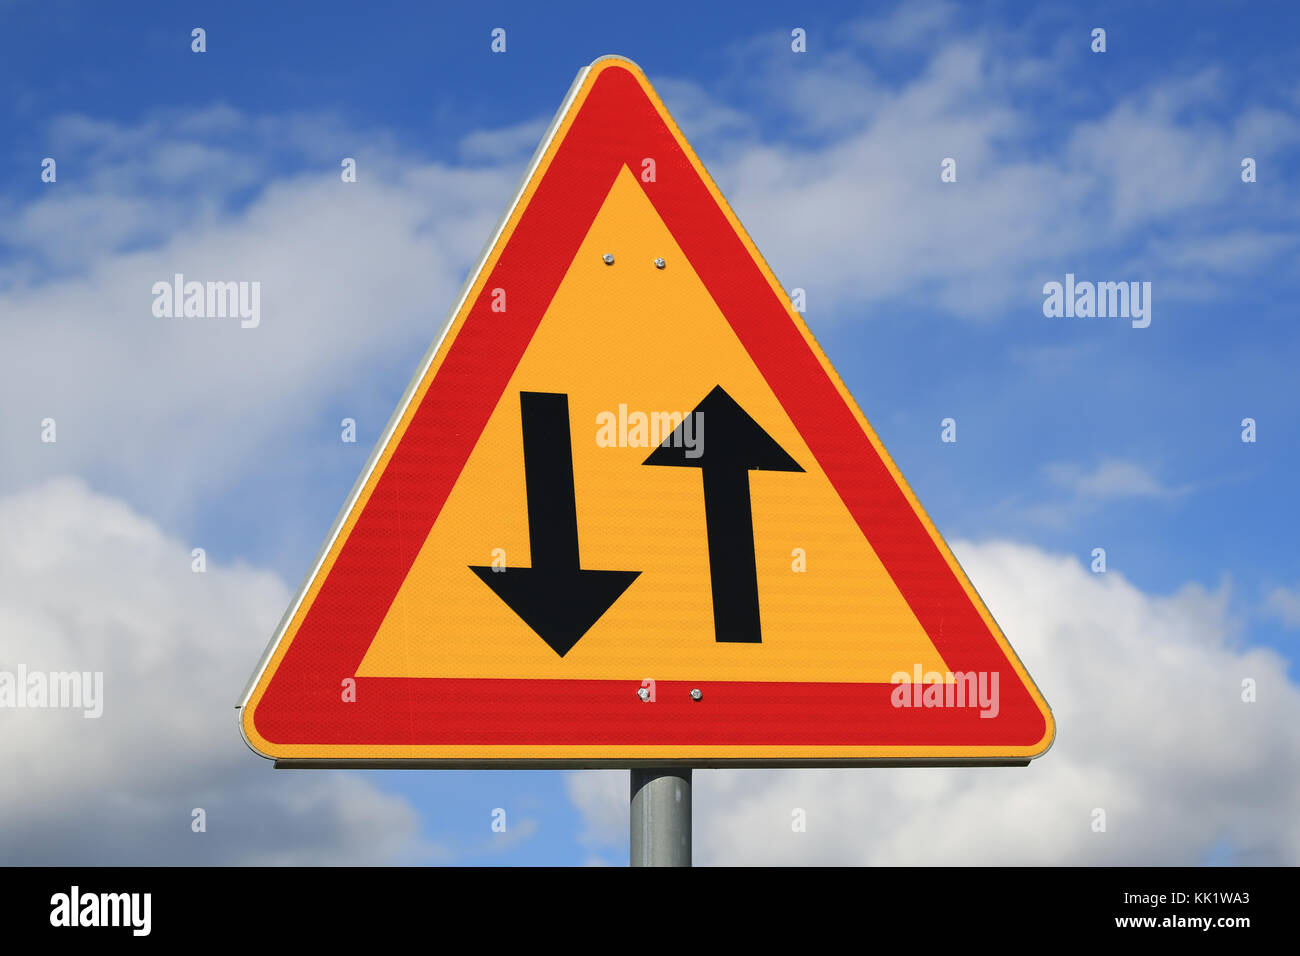 Sign two way traffic against blue sky with some clouds. Stock Photo